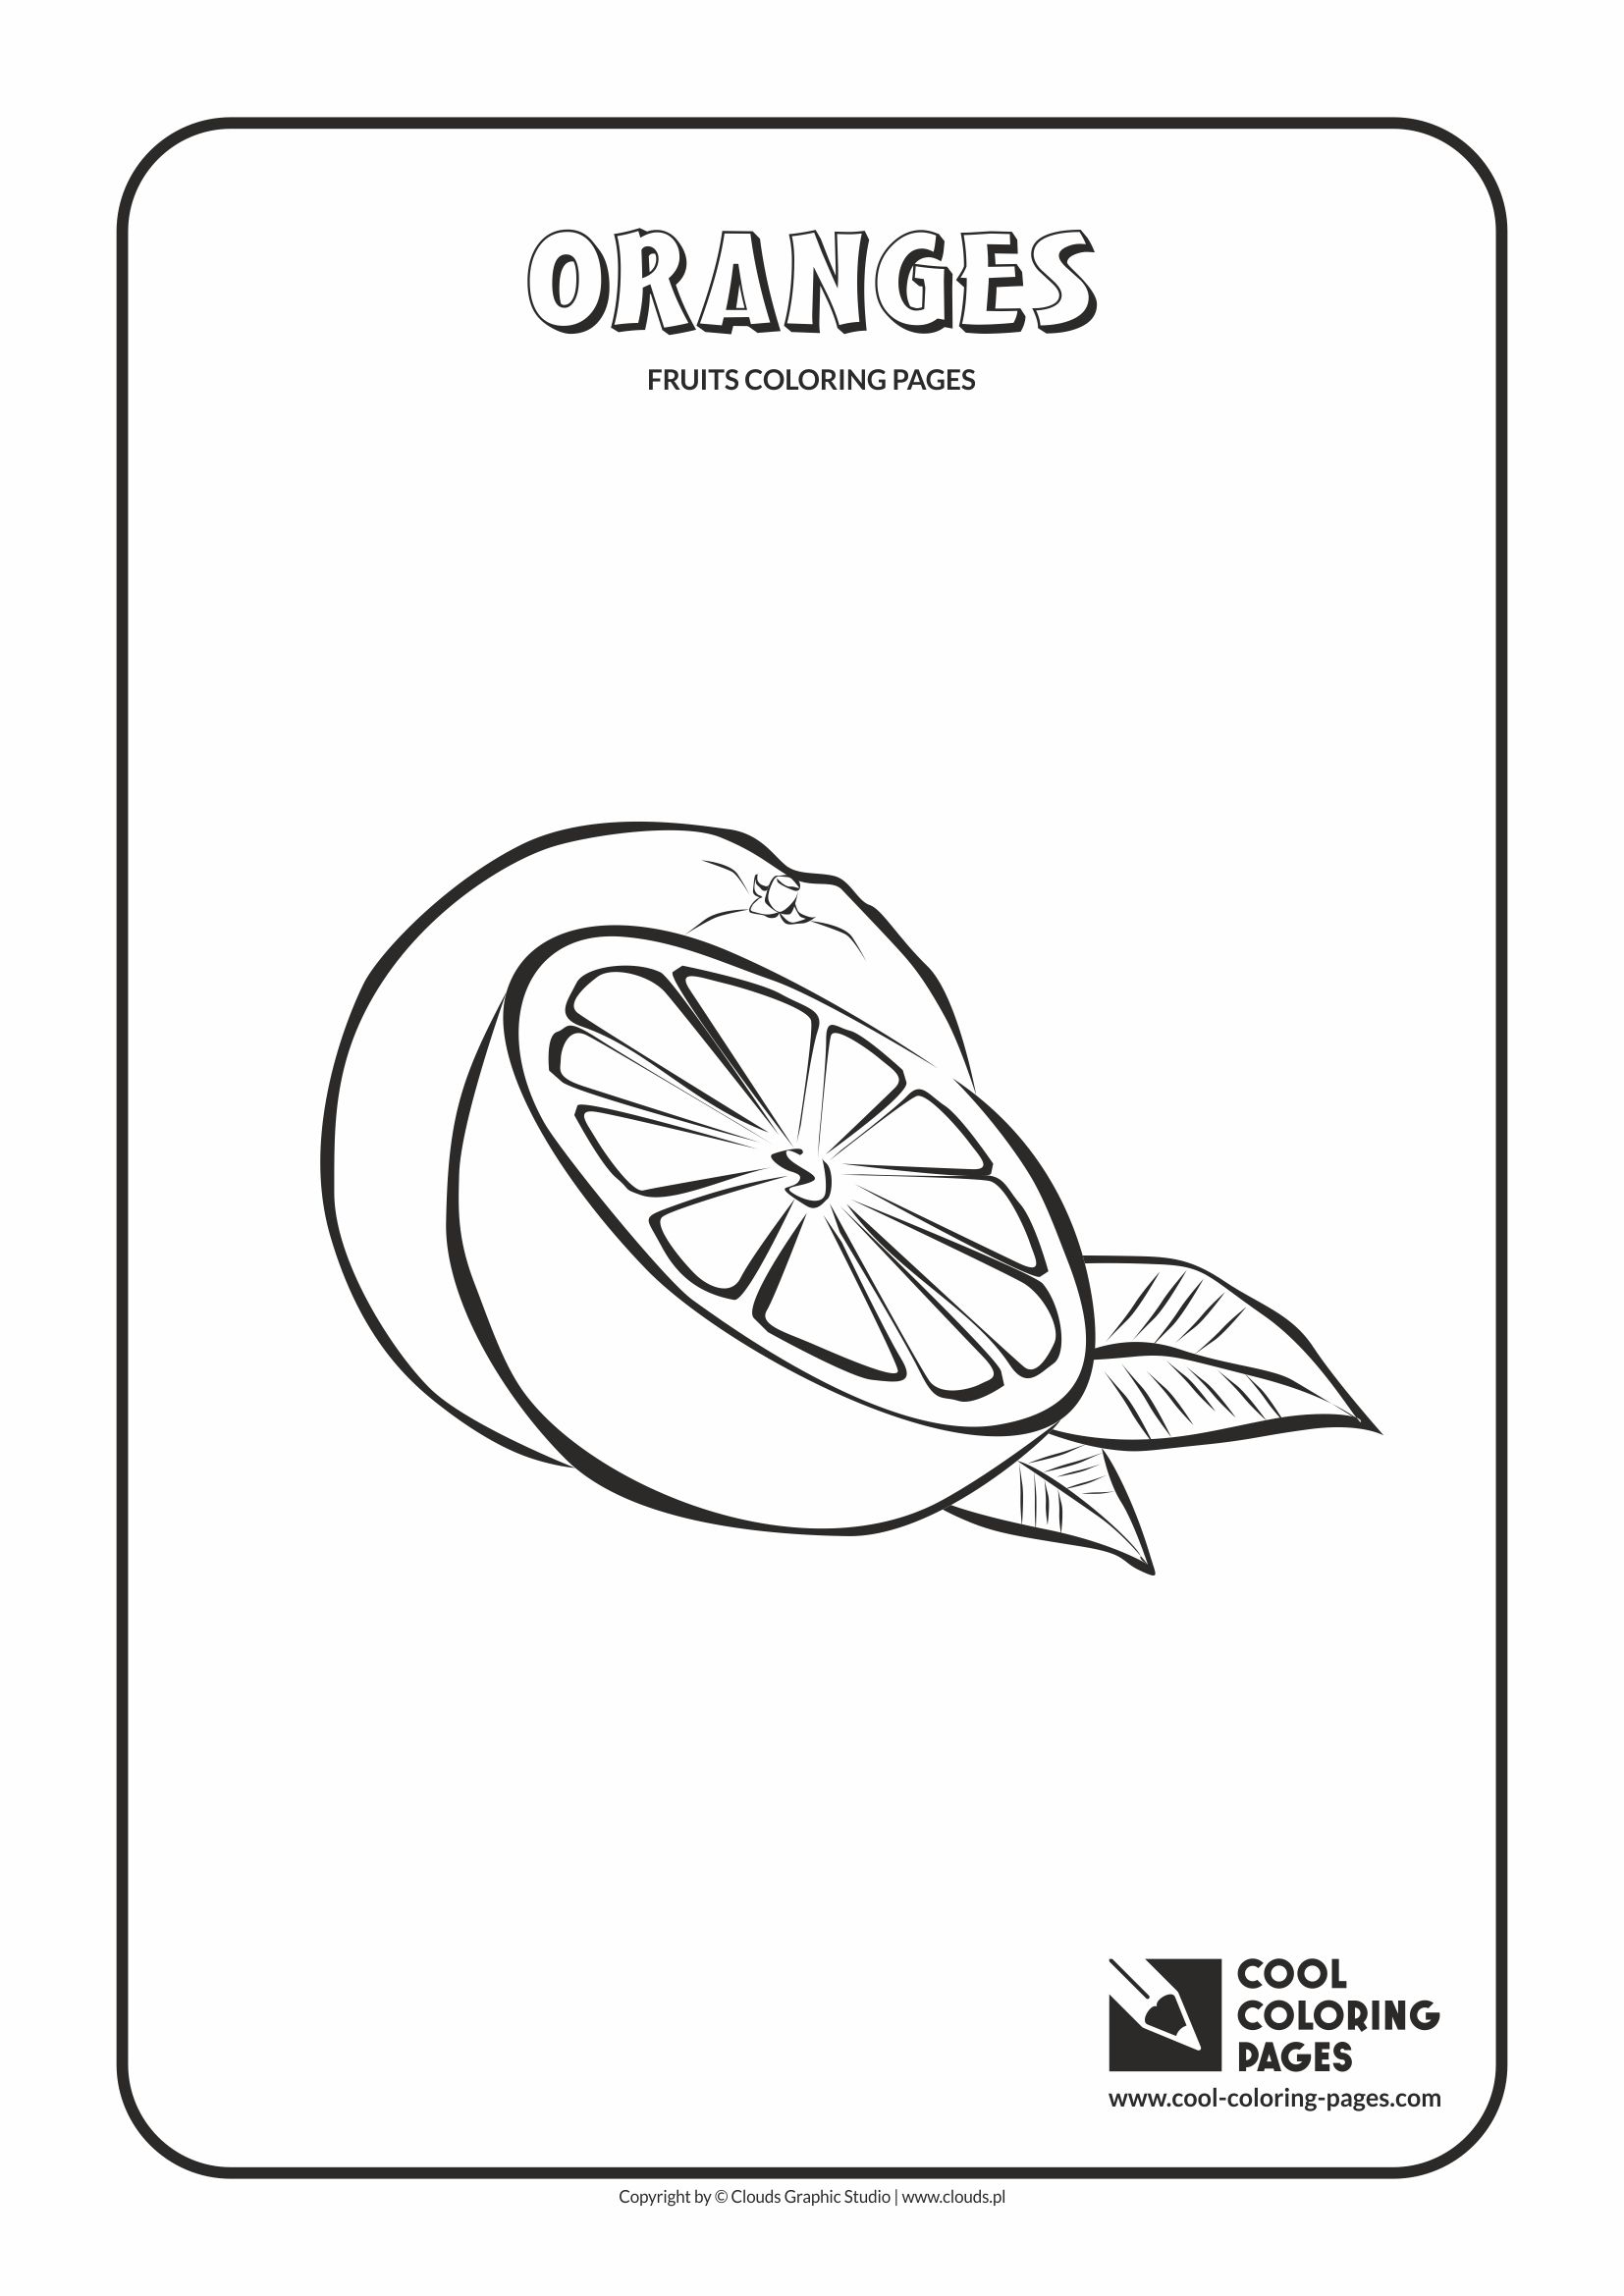 Cool Coloring Pages - Plants / Oranges / Coloring page with oranges